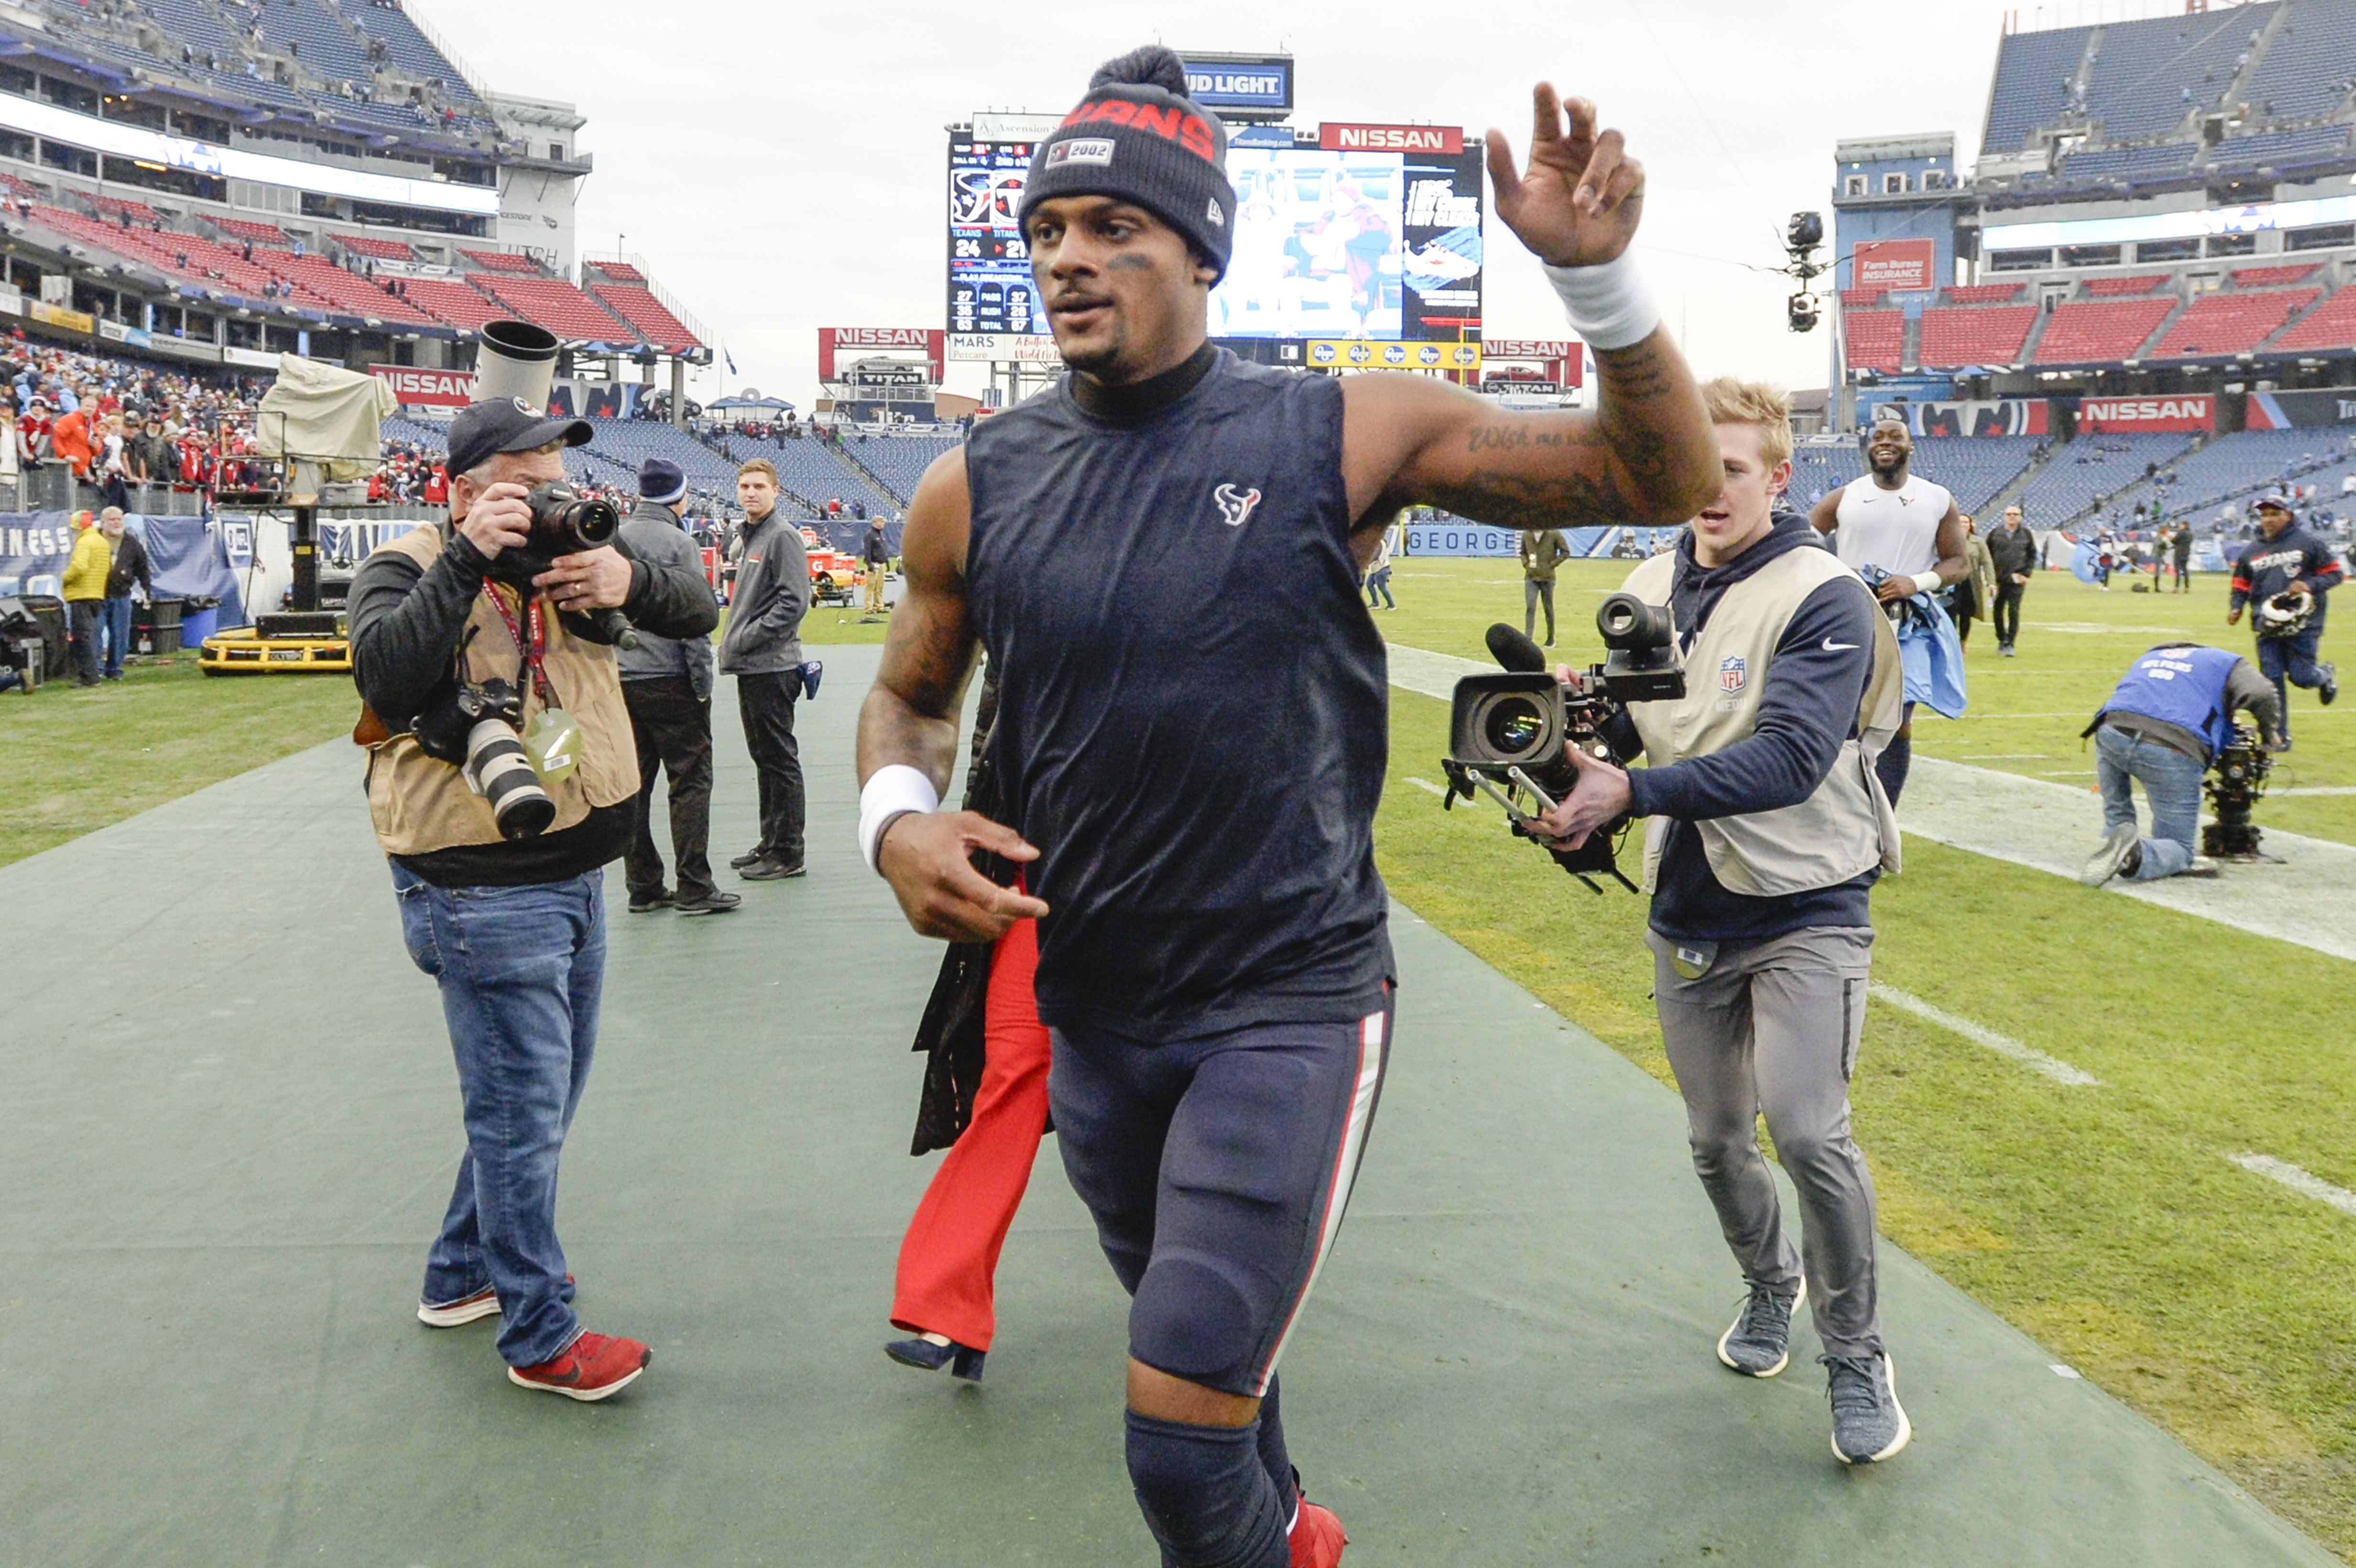 Texans takes AFC South lead with showdown win at Titans